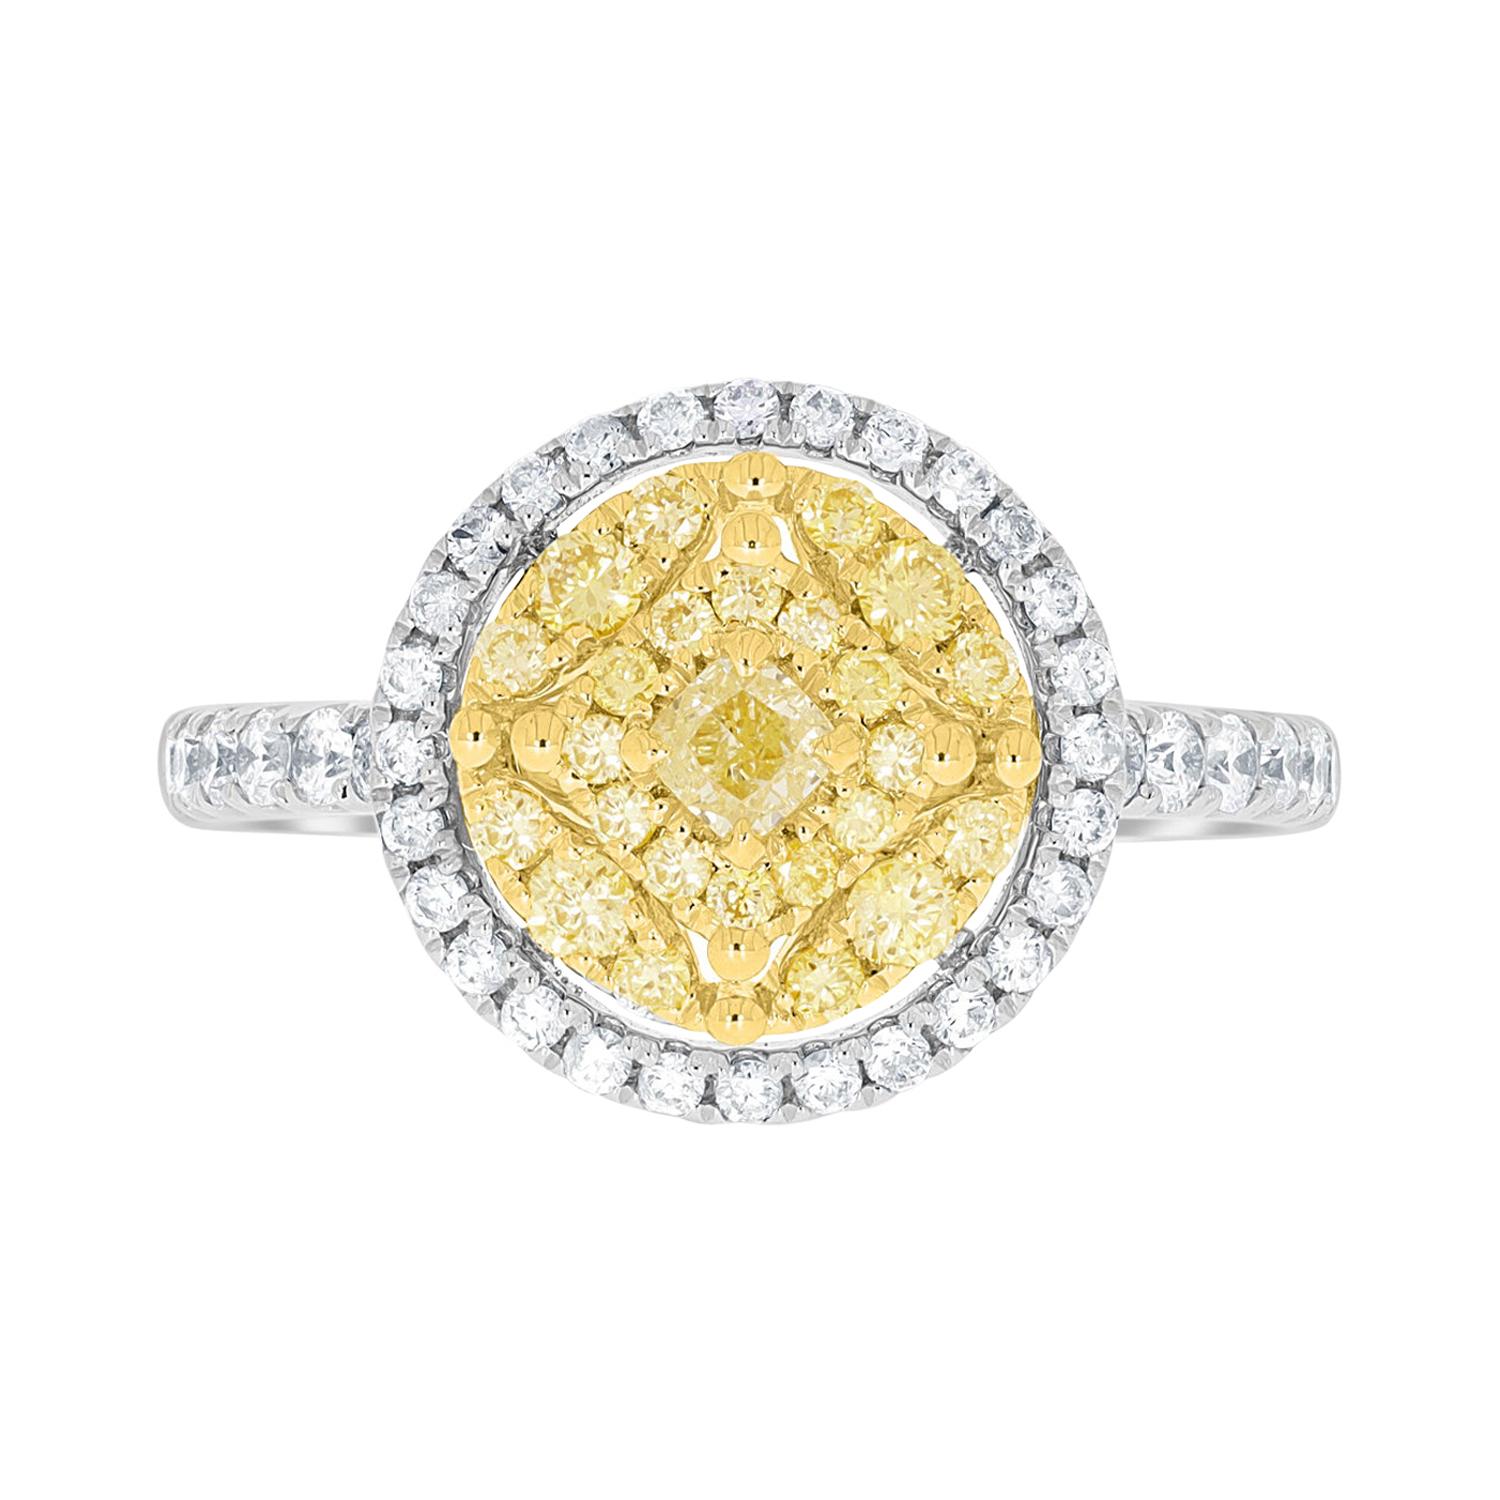 0.16tct Yellow Diamond Ring with 0.73ct Diamonds Set in 14K Two Tone Gold